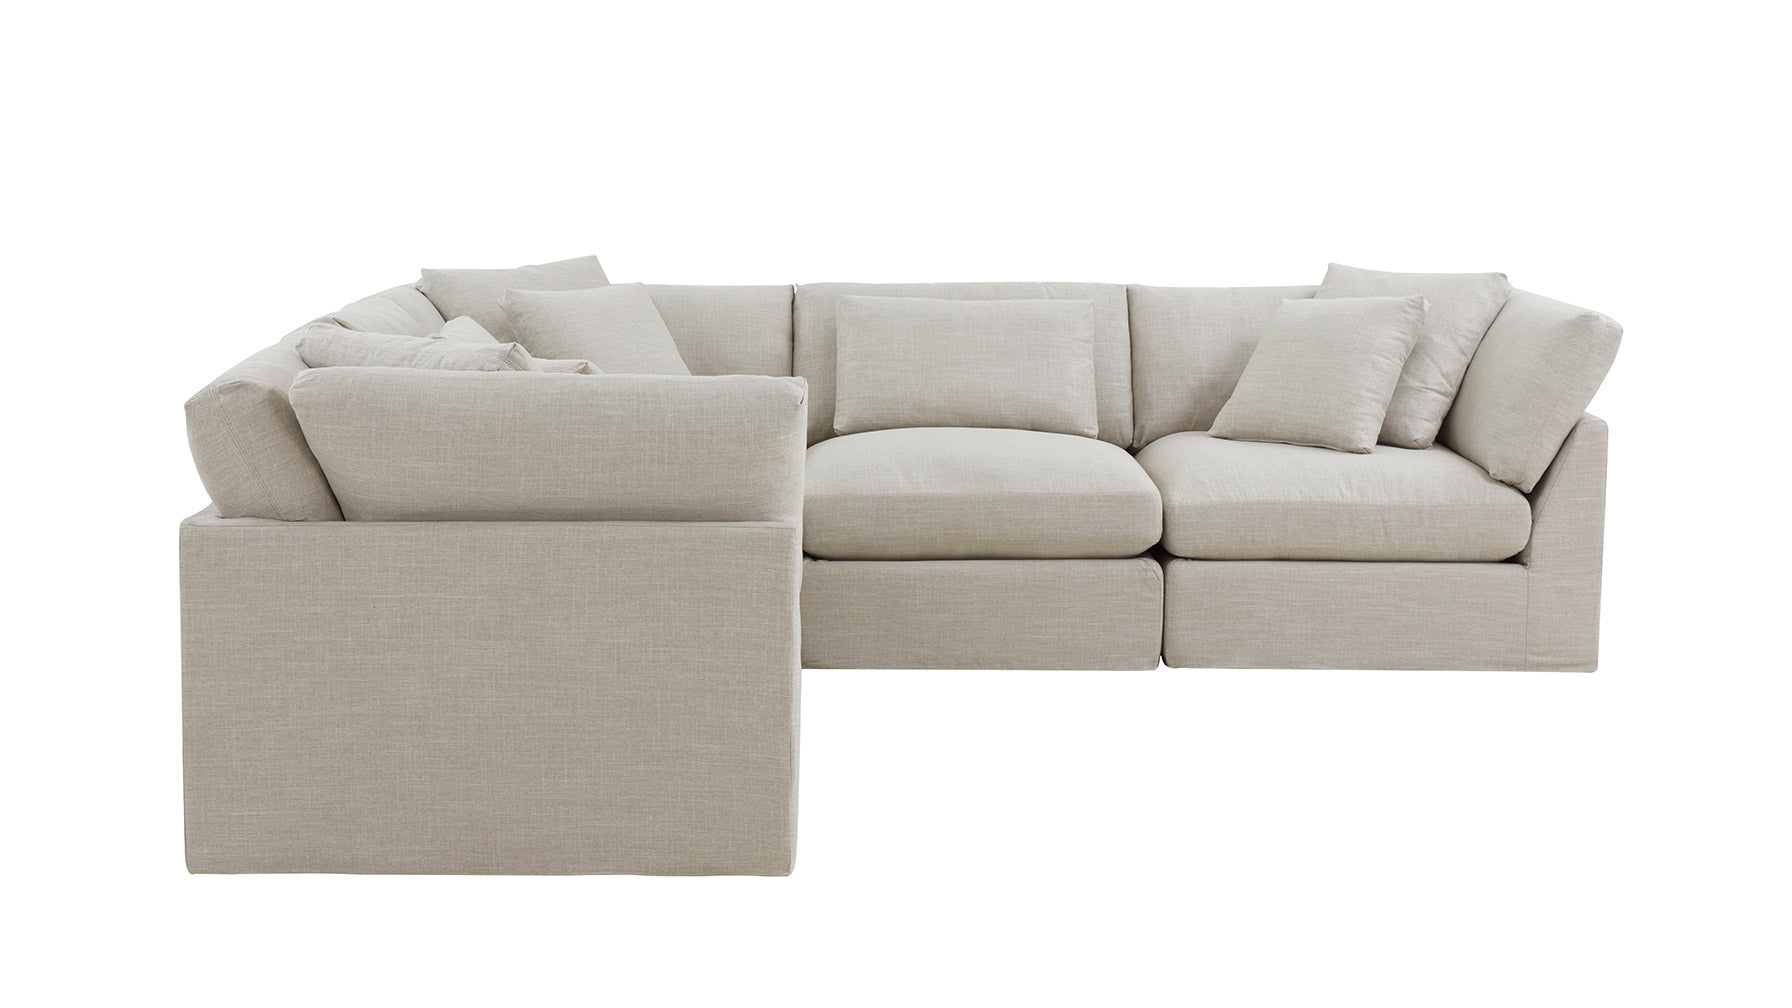 Get Together™ 5-Piece Modular Sectional Closed, Large, Light Pebble - Image 6